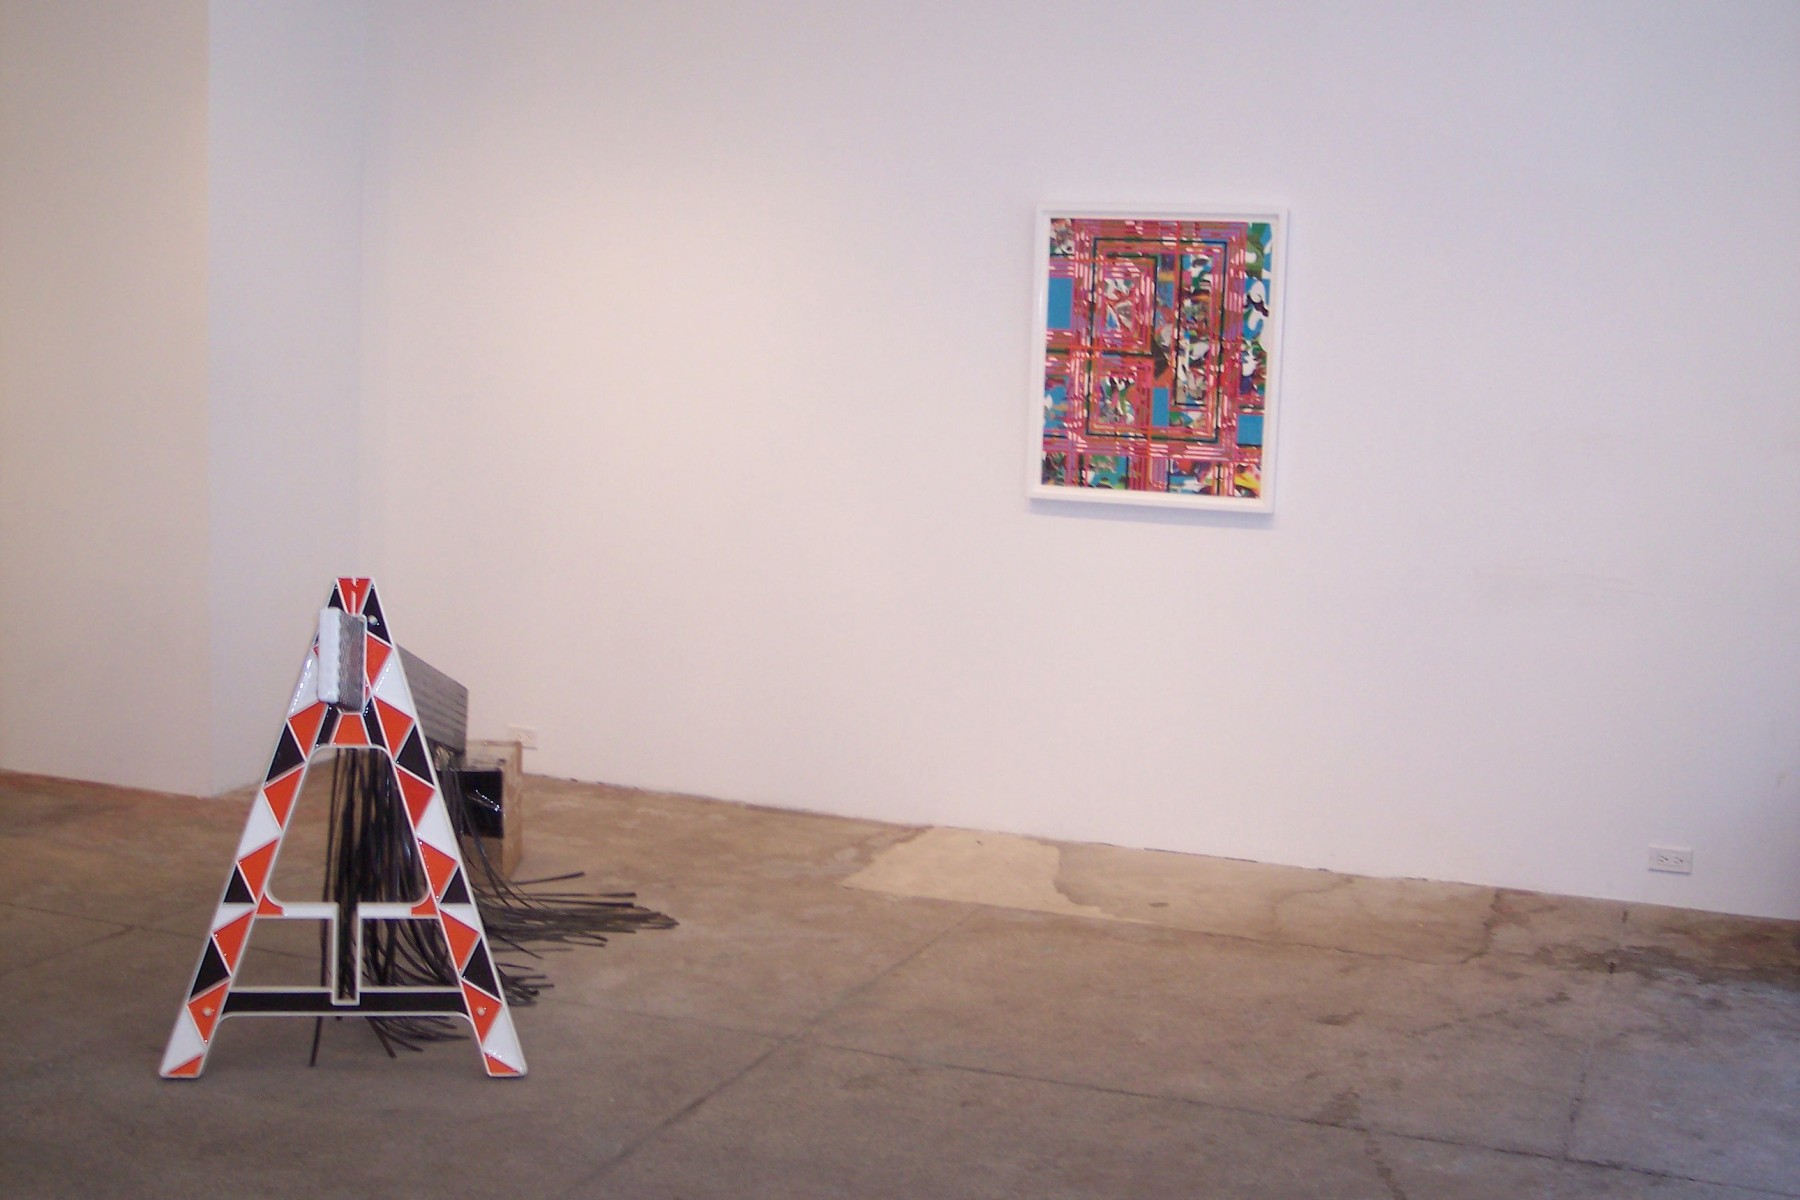 Gallery view of framed artwork and police barrier